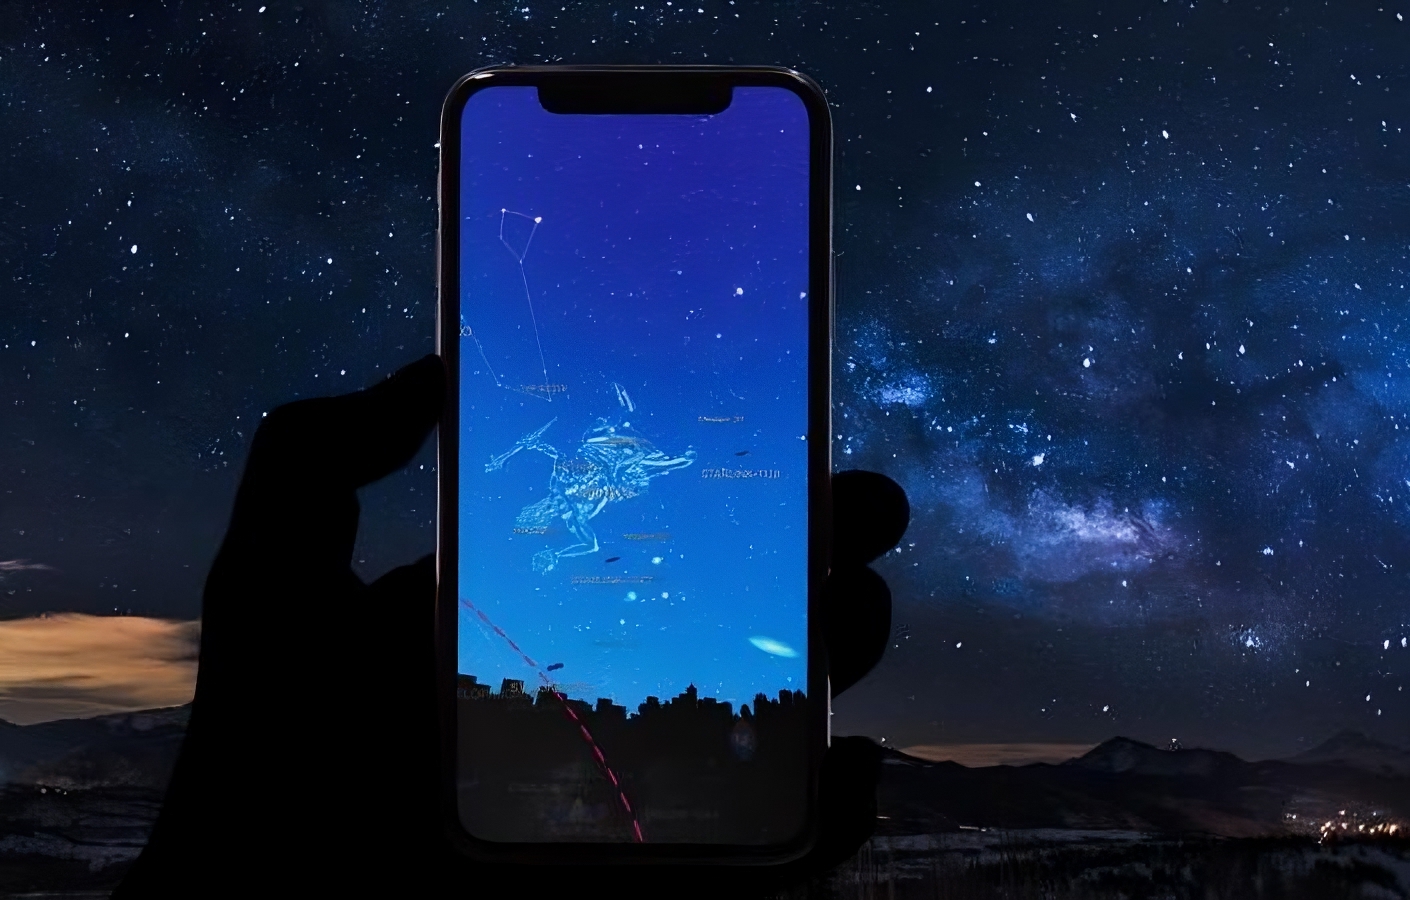 12 Best Stargazing Apps to Identify Constellations and Planets - Geekflare